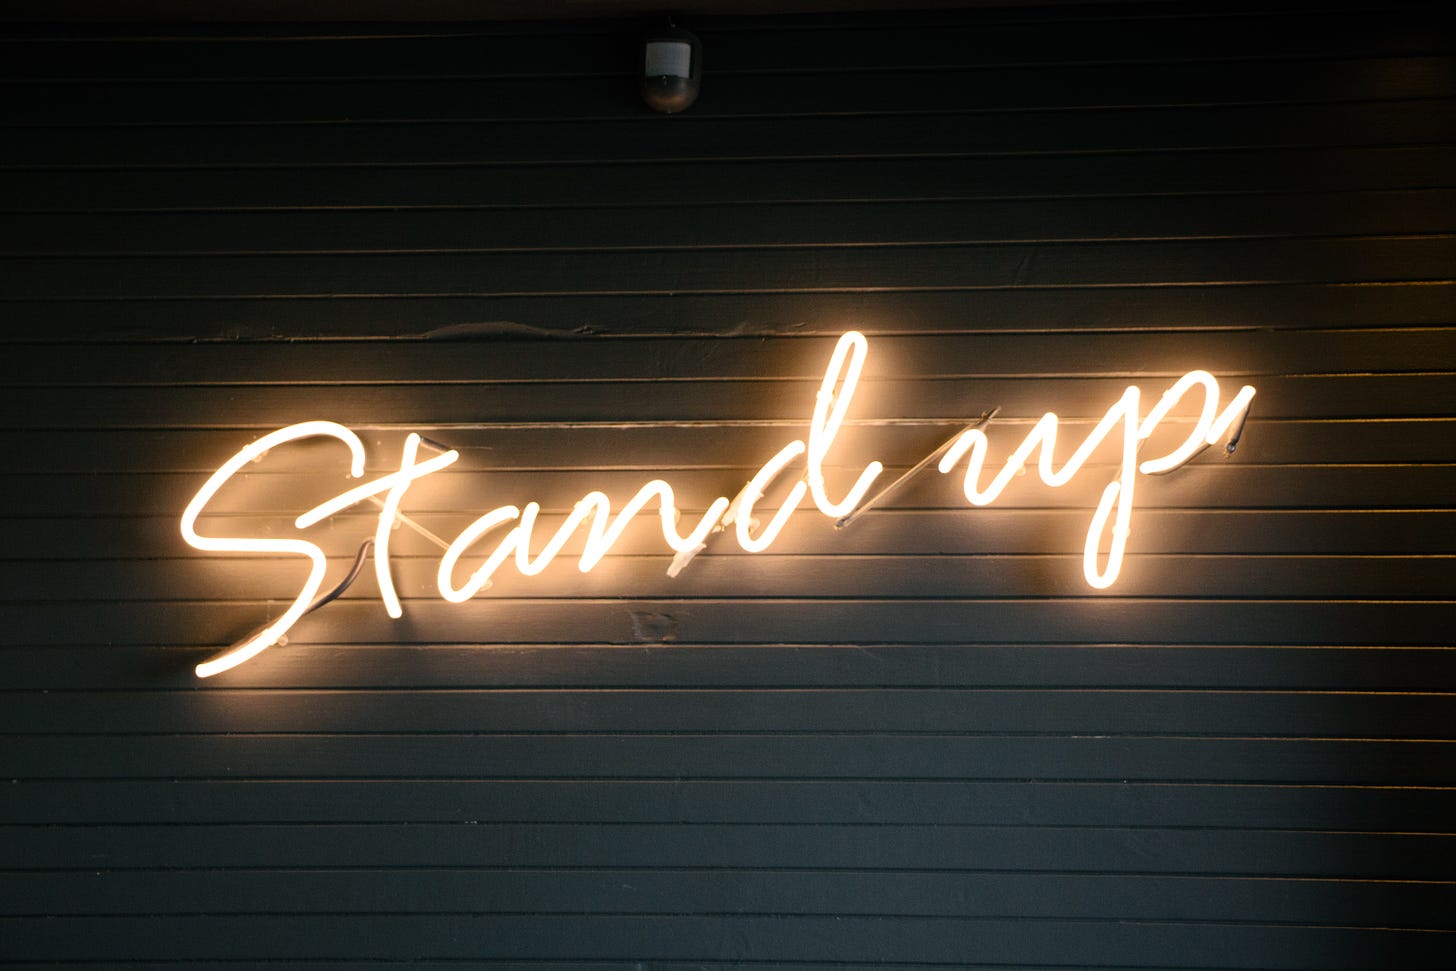 The phrase "Stand up" in a lighted sign on a slatted wooden backdrop